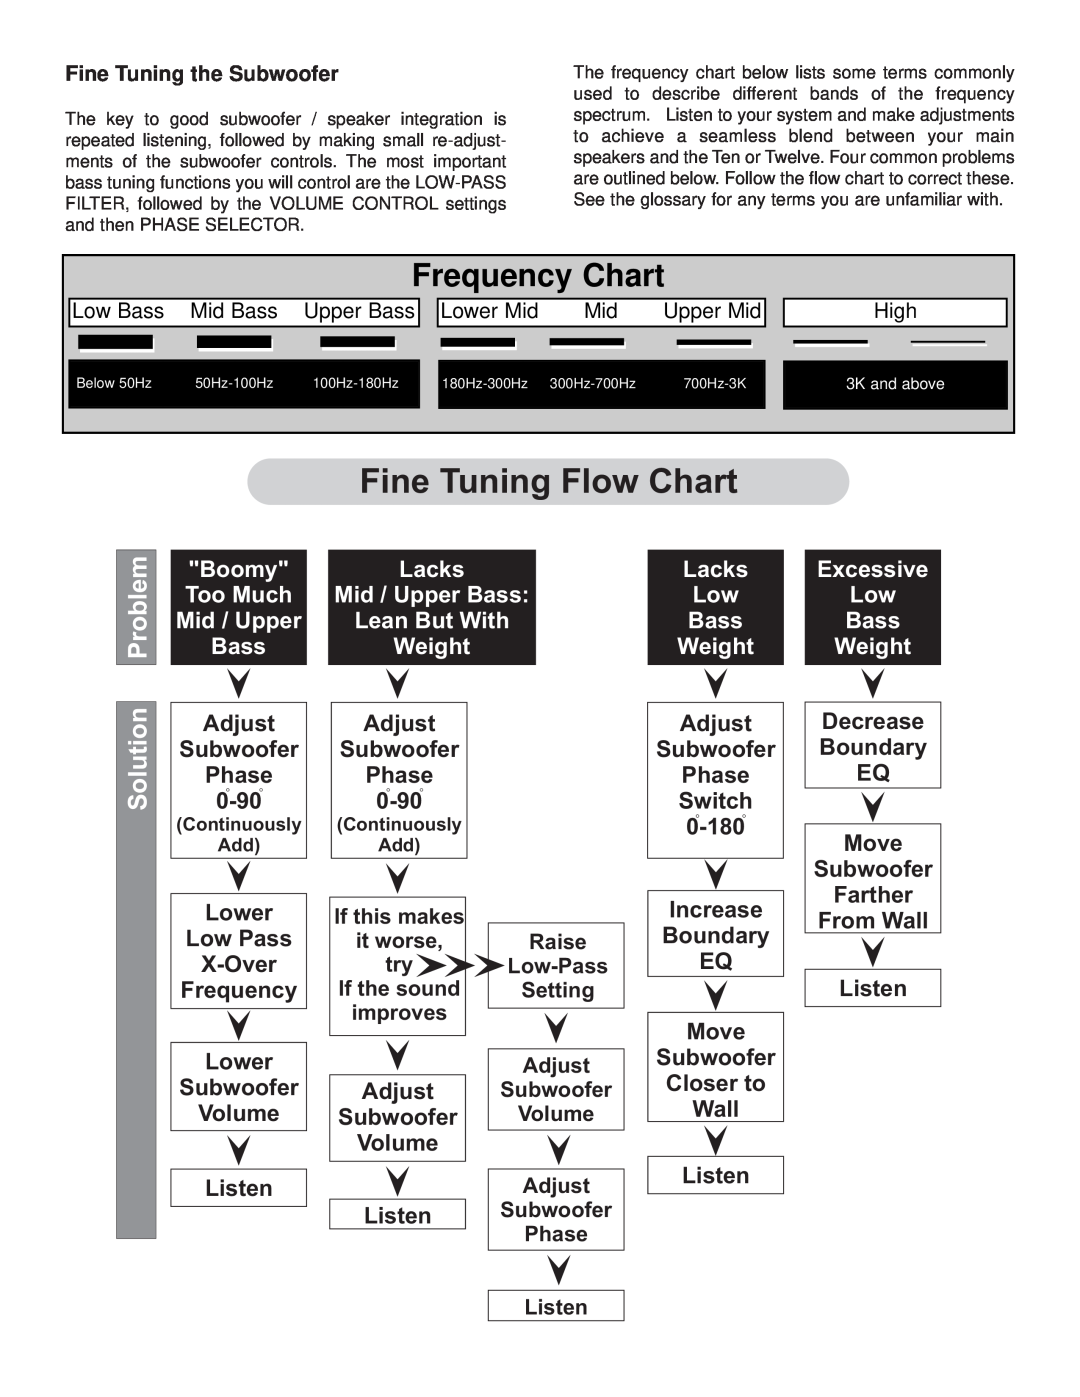 NHT Powered Subwoofers Fine Tuning Flow Chart, Frequency Chart, Solution Problem, Boomy Too Much Mid / Upper Bass 